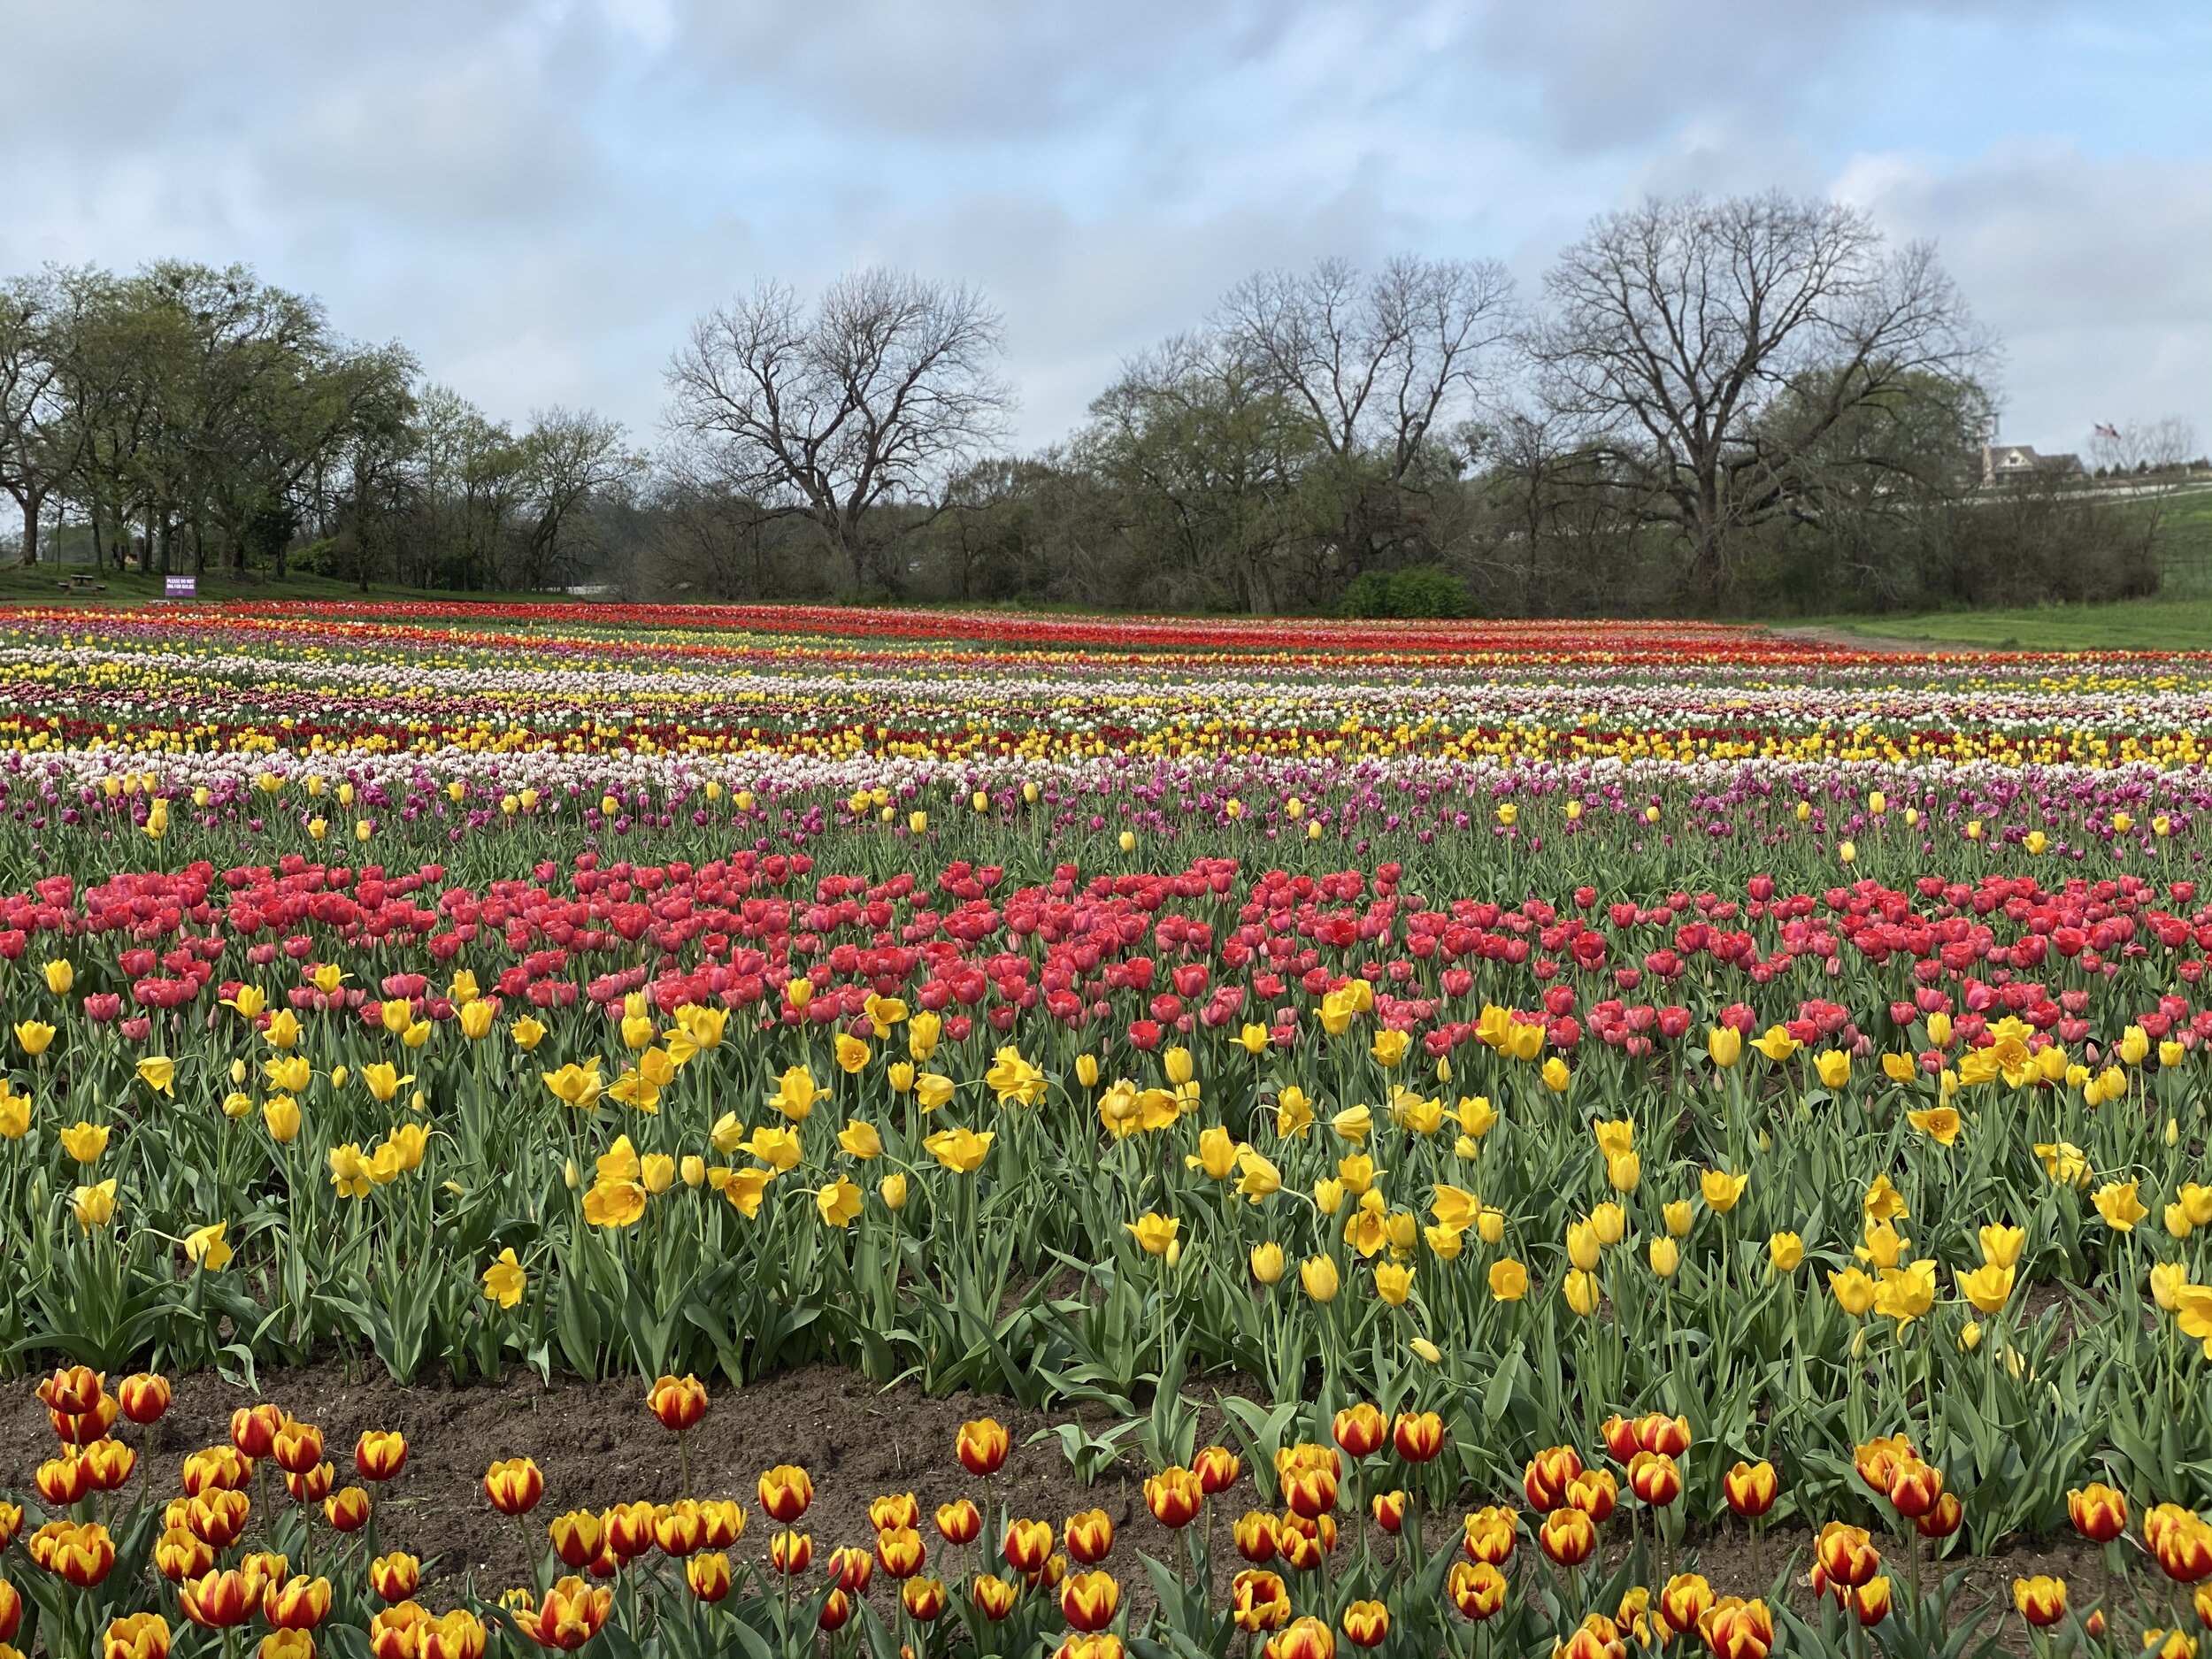  John visited  Keukenhof Park  in Holland in May 2018, also known as the Garden of England. The garden first opened to the public in 1950 and was deemed an instant hit with 200,000 visitors in its first year alone. He decided to recreate the tulip ga